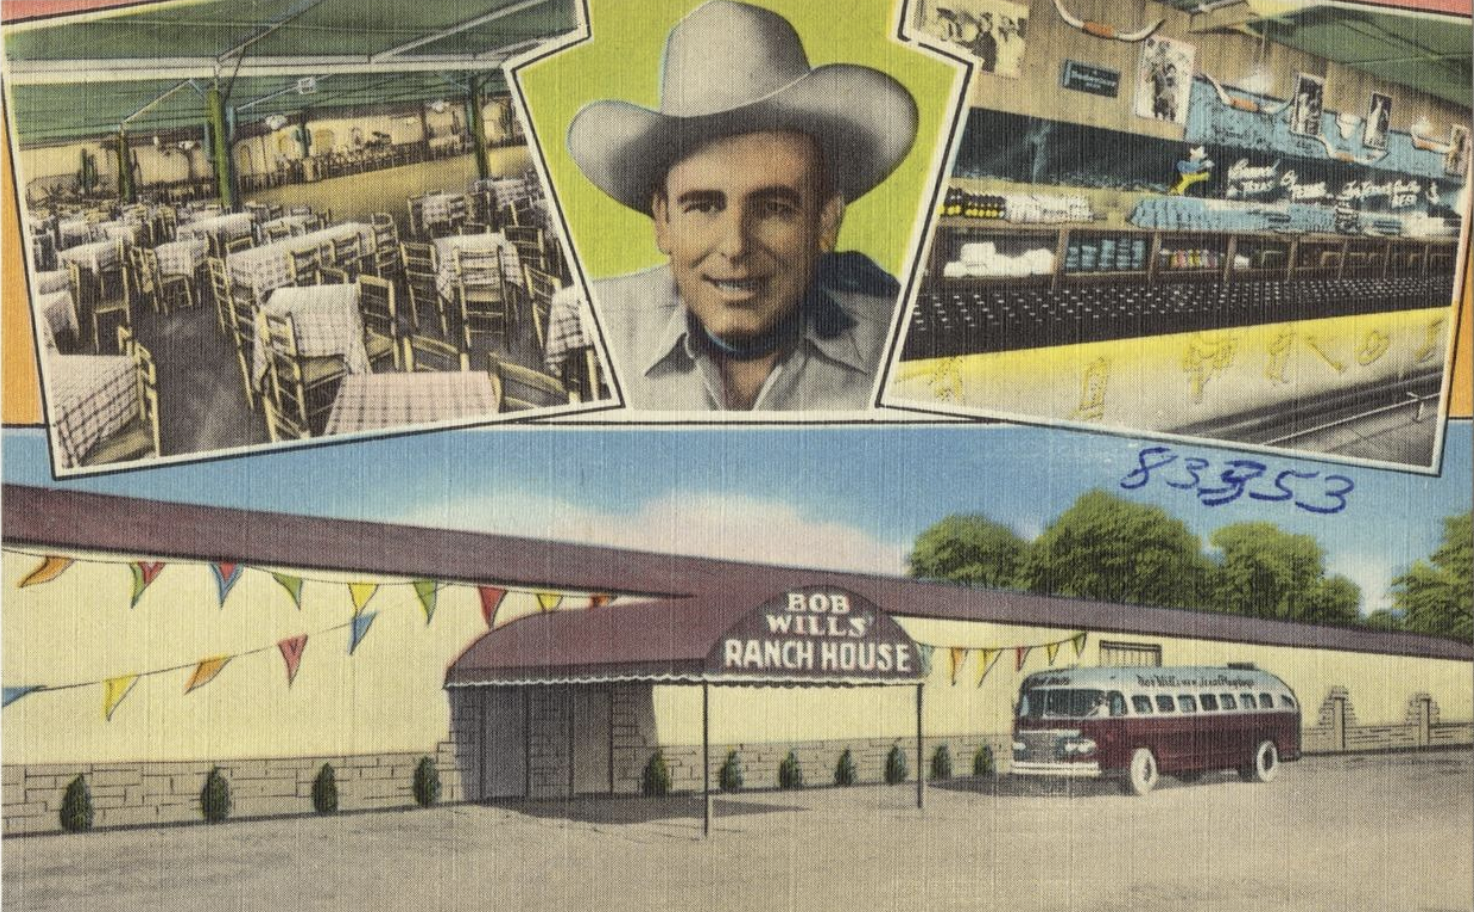 An old post card featuring Bob Wills and what was called Bob Wills Ranch